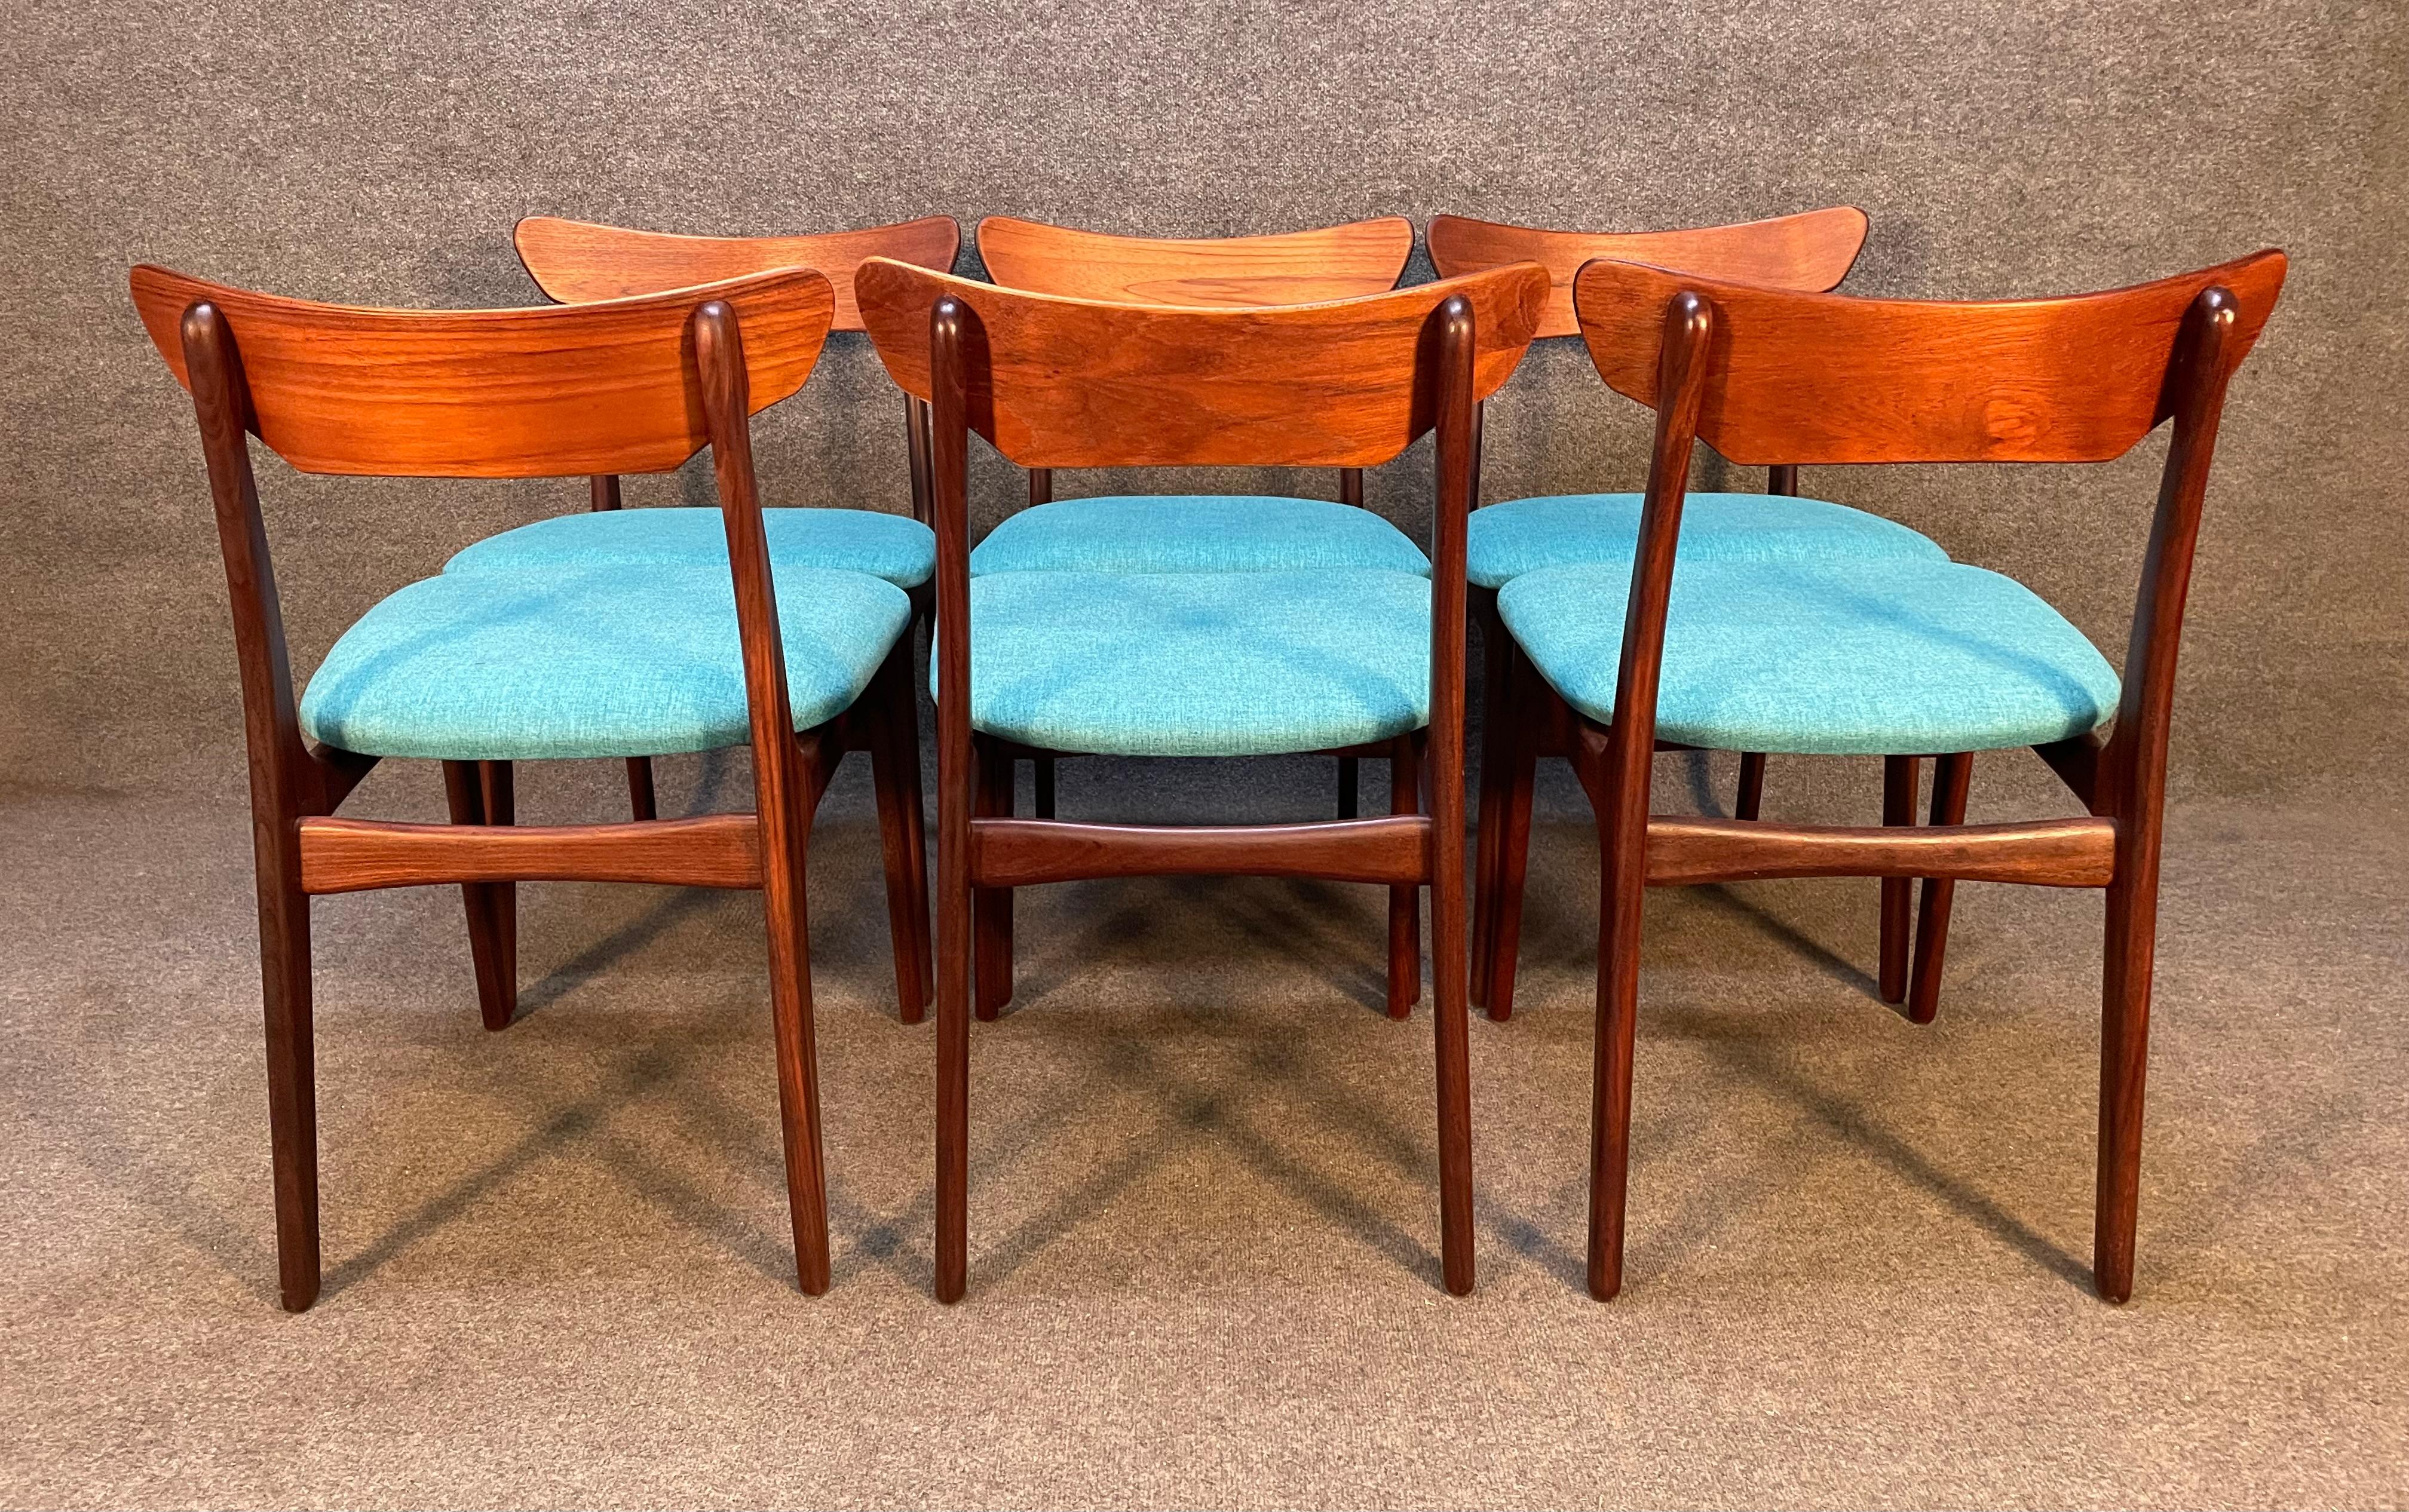 Here is a set of six scandinavian modern teak dining chairs designed by Schiønning & Elgaard and manufactured by Randers Møbelfabrik in Denmark in the 1960's.
This exquisite set, recently imported from Europe to California before their refinishing,